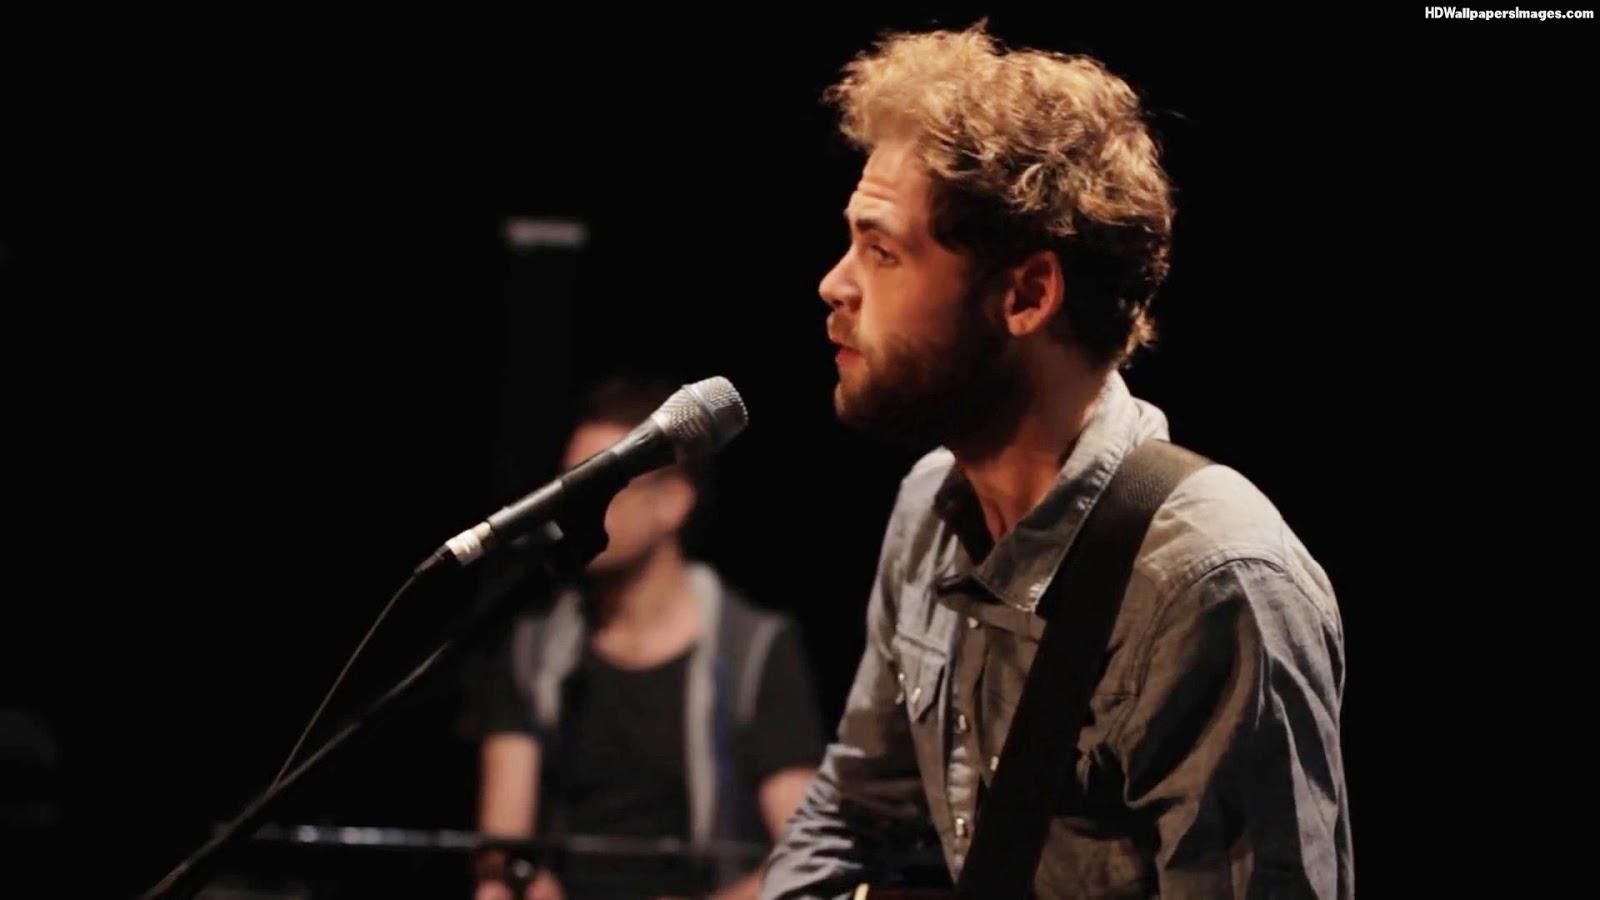 You will love passenger too after reading this!